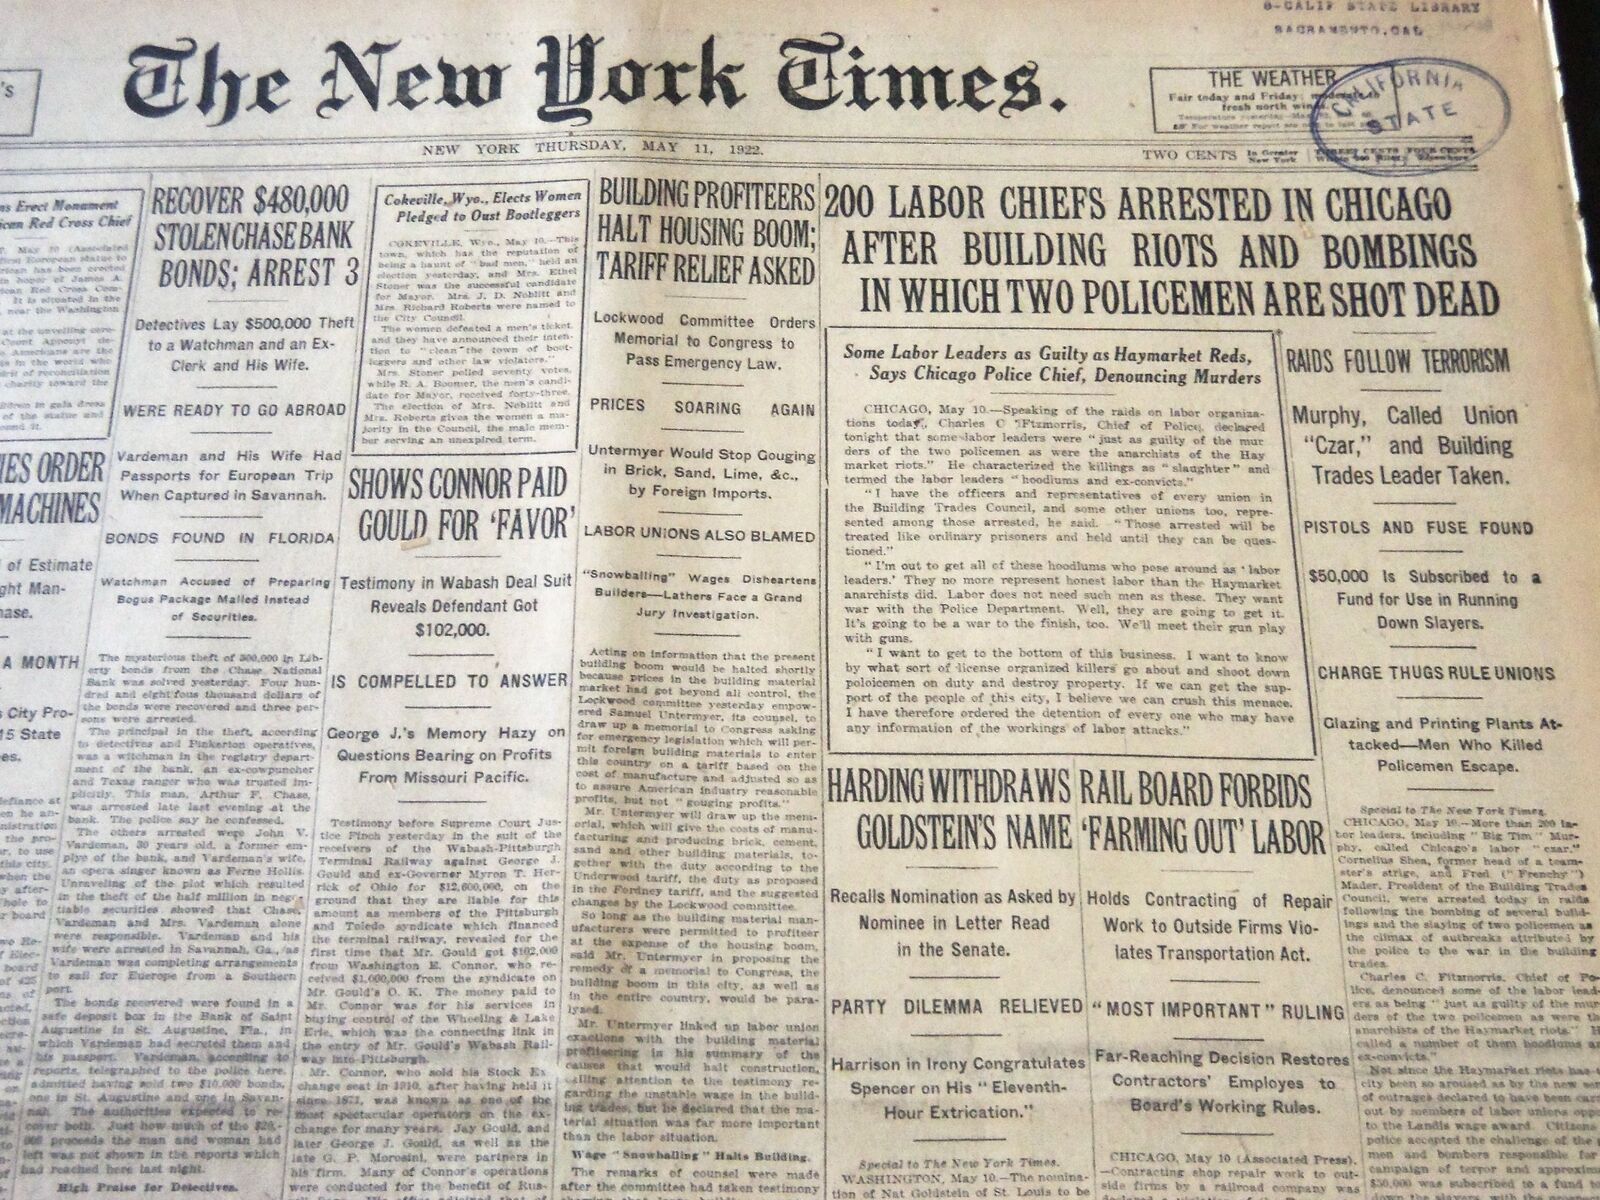 1922 MAY 11 NEW YORK TIMES - 200 LABOR CHIEFS ARRESTED IN CHICAGO - NT 5822